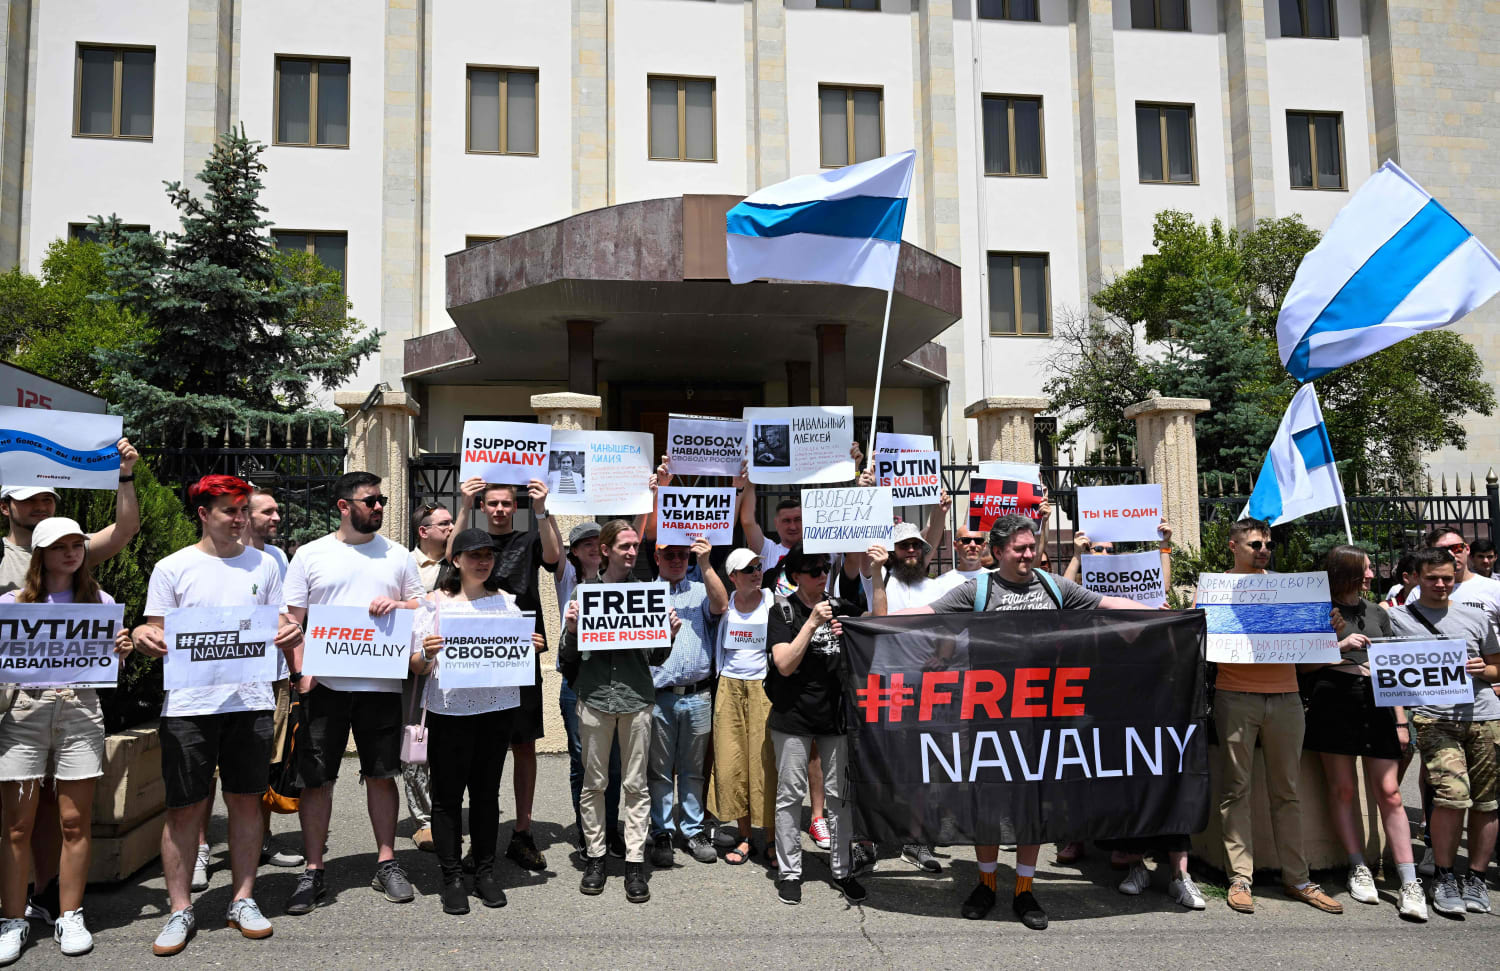 Supporters of Russian opposition leader Navalny hold protests to mark
his birthday